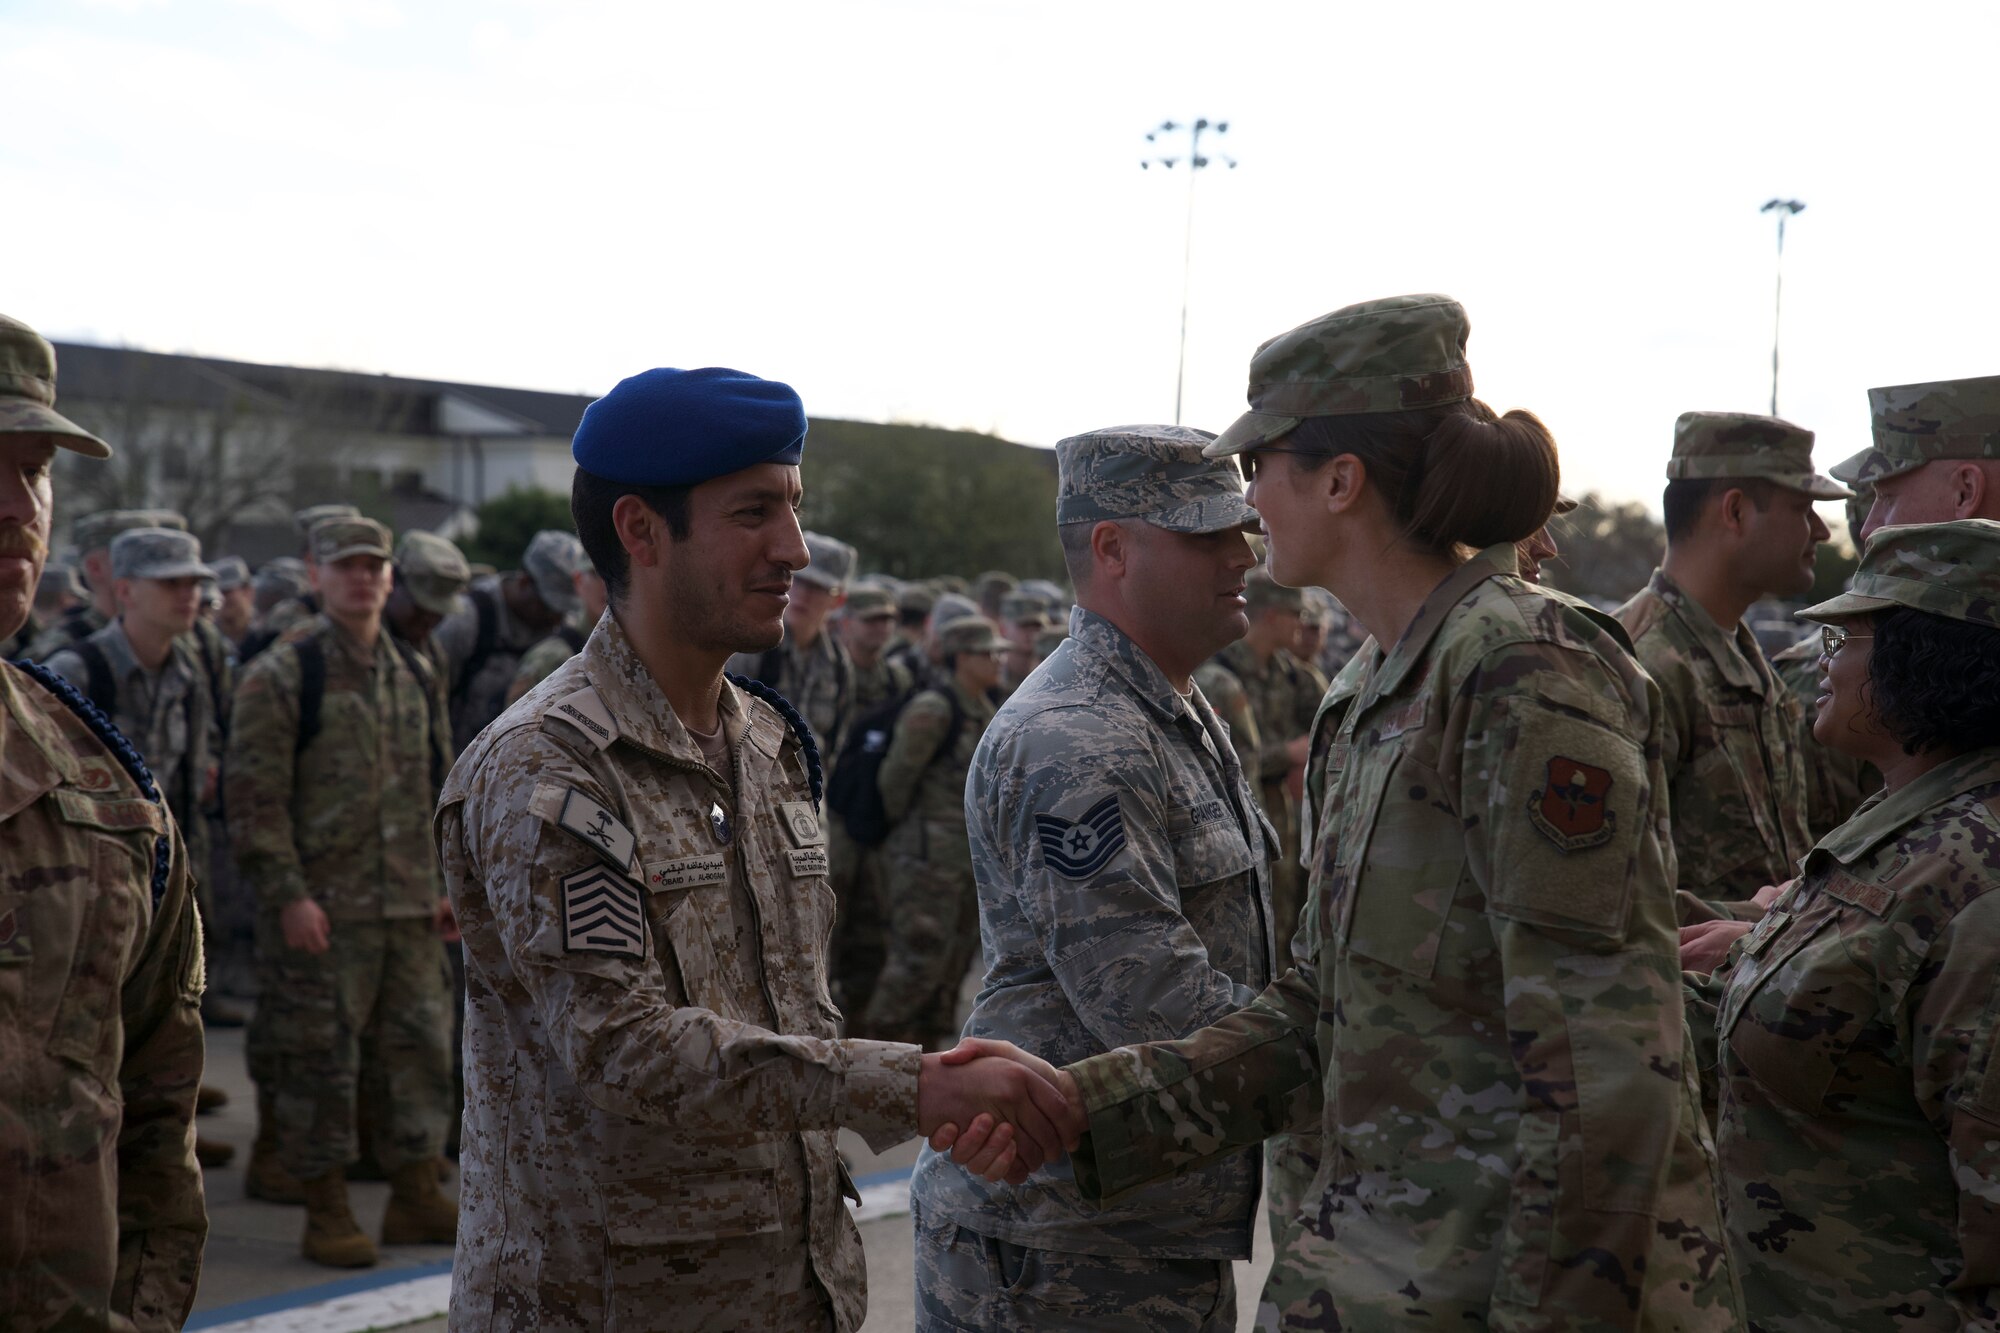 Royal Saudi air force Senior Master Sgt. Obaid Al-Bogami, 81st Training Support Squadron Military Training Leader course student, shakes hands with U.S. Air Force Col. Heather Blackwell, 81st Training Wing commander, during the MTL course graduation ceremony outside the Levitow Training Support Facility at Keesler Air Force Base, Mississippi, March 5, 2020.  Al-Bogami was the first international student the MTL schoolhouse graduated in approximately three years. (U.S. Air Force photo by Airman 1st Class Spencer Tobler)